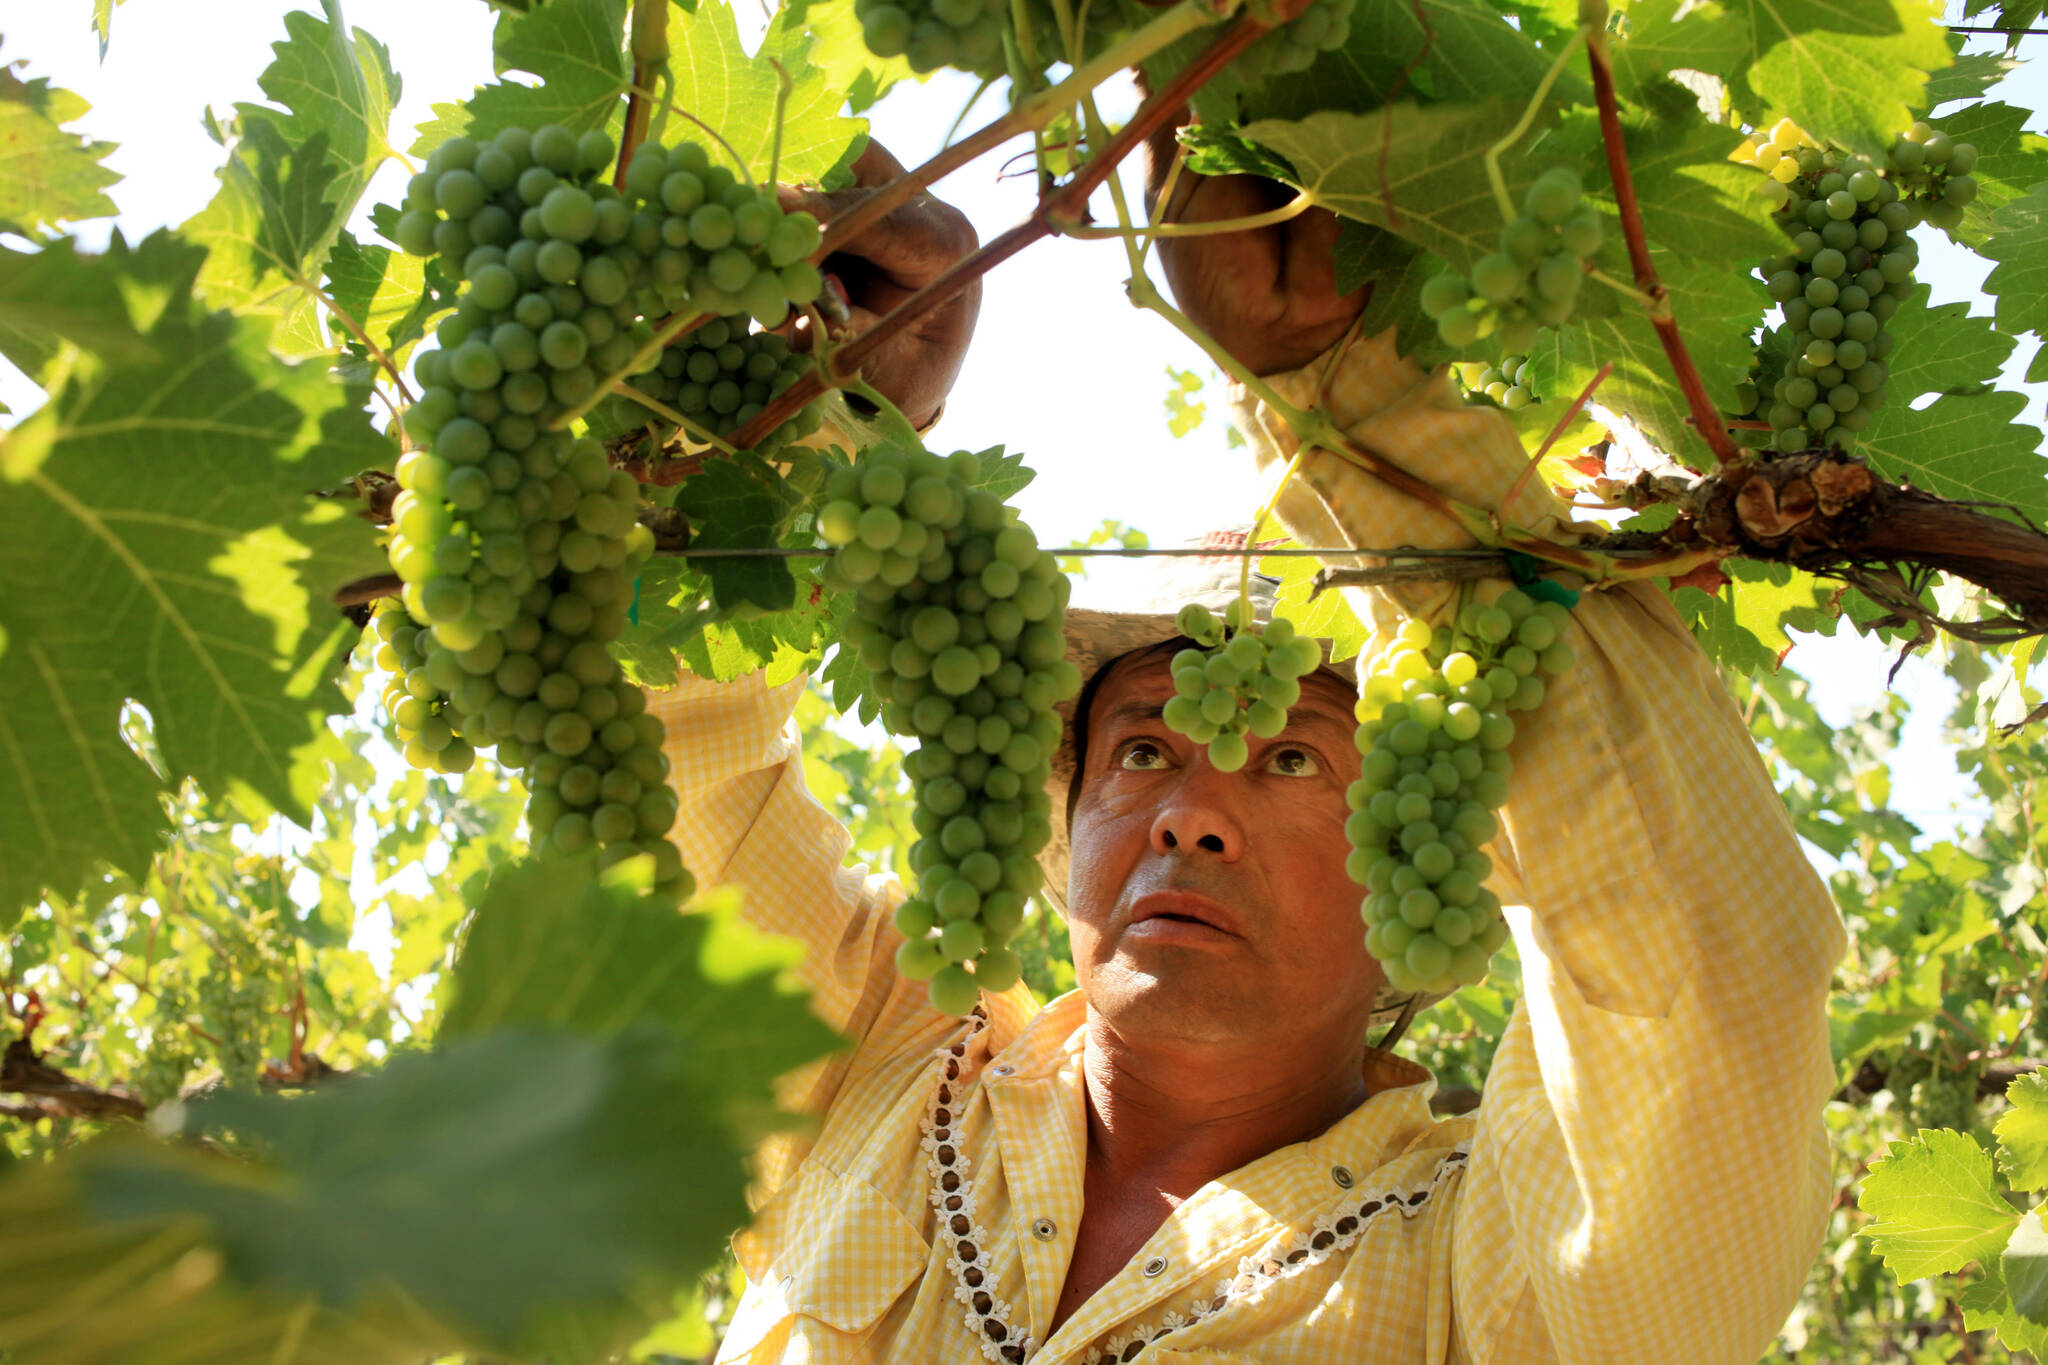 Erika Schultz | Seattle Times | TNS | File Photo
Efrain Palencia, a longtime employee, drops clusters of viognier grapes at Crawford Vineyard to lessen to load to help with the ripening process.